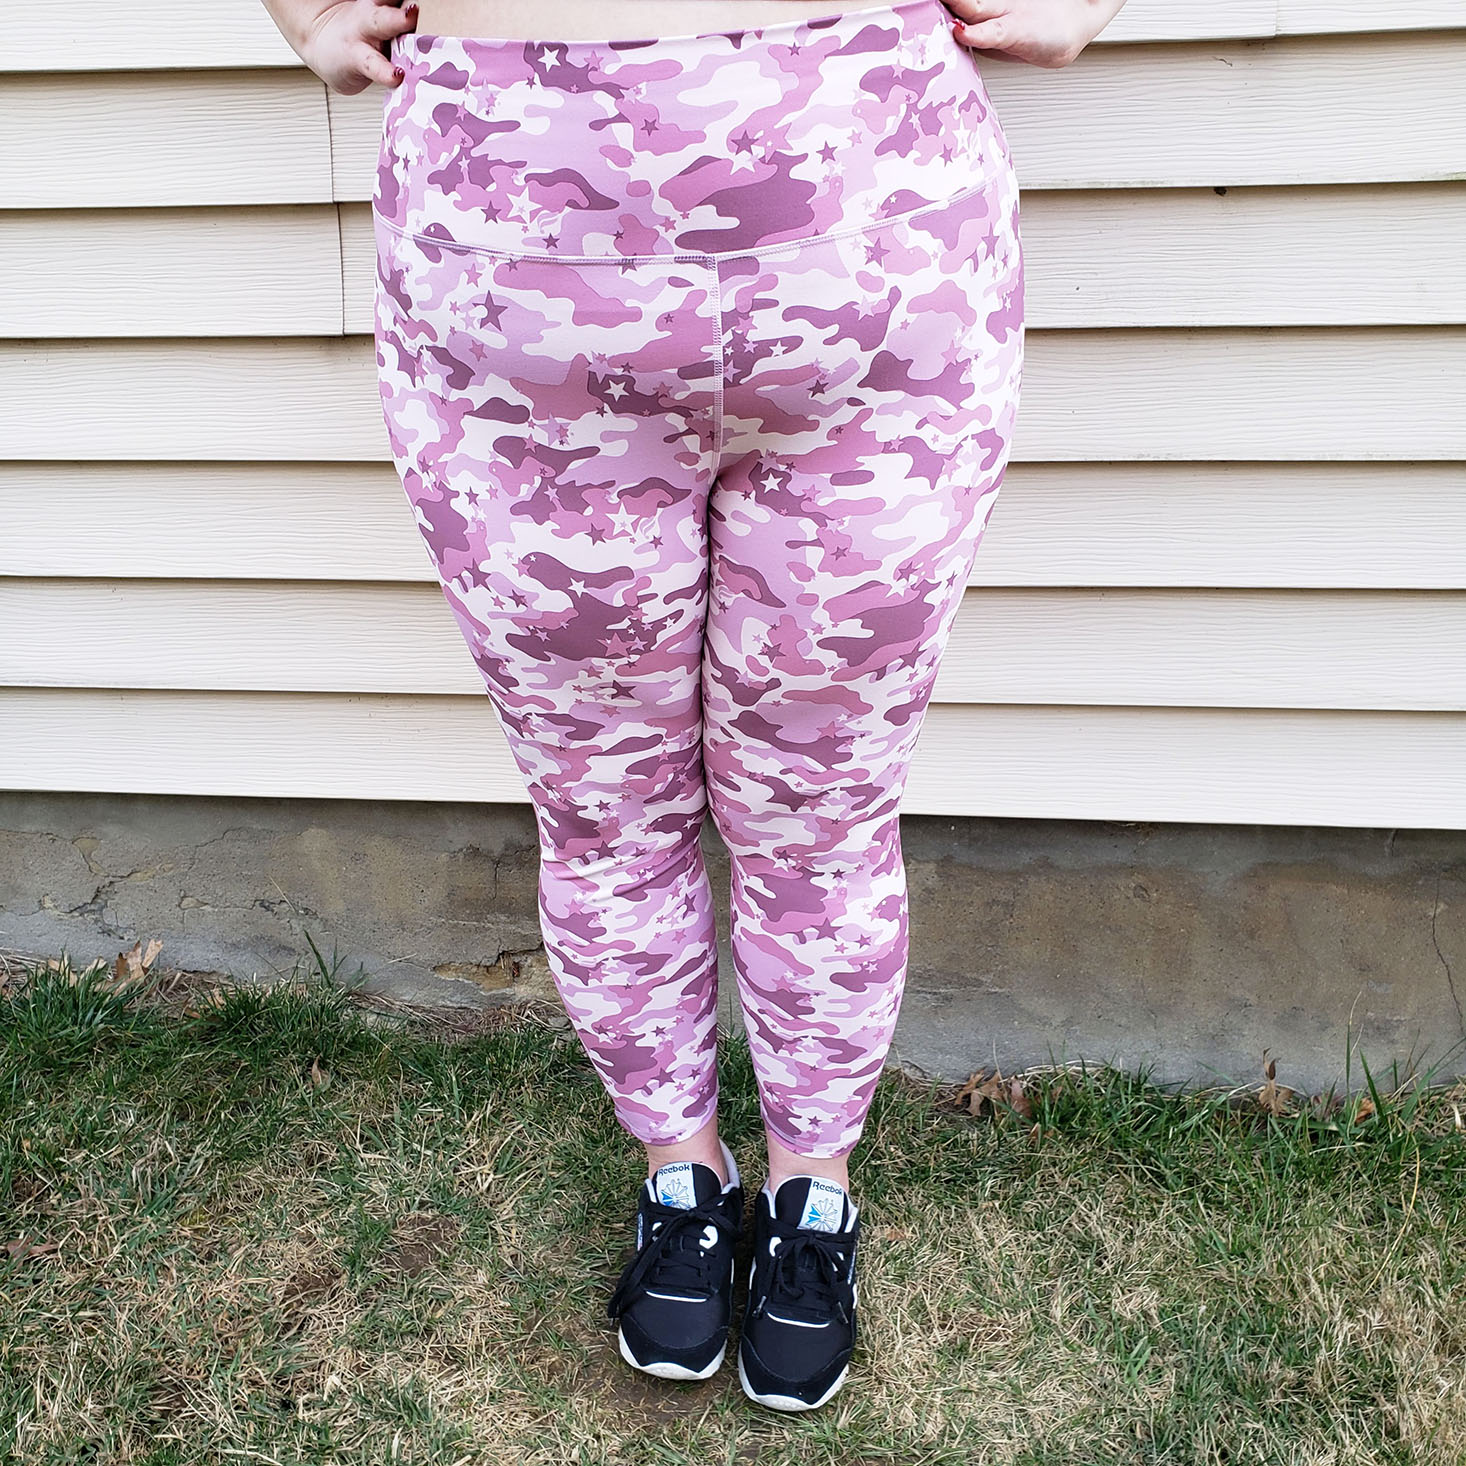 Fabletics VIP Plus Size Review + Coupon - February 2020 | MSA